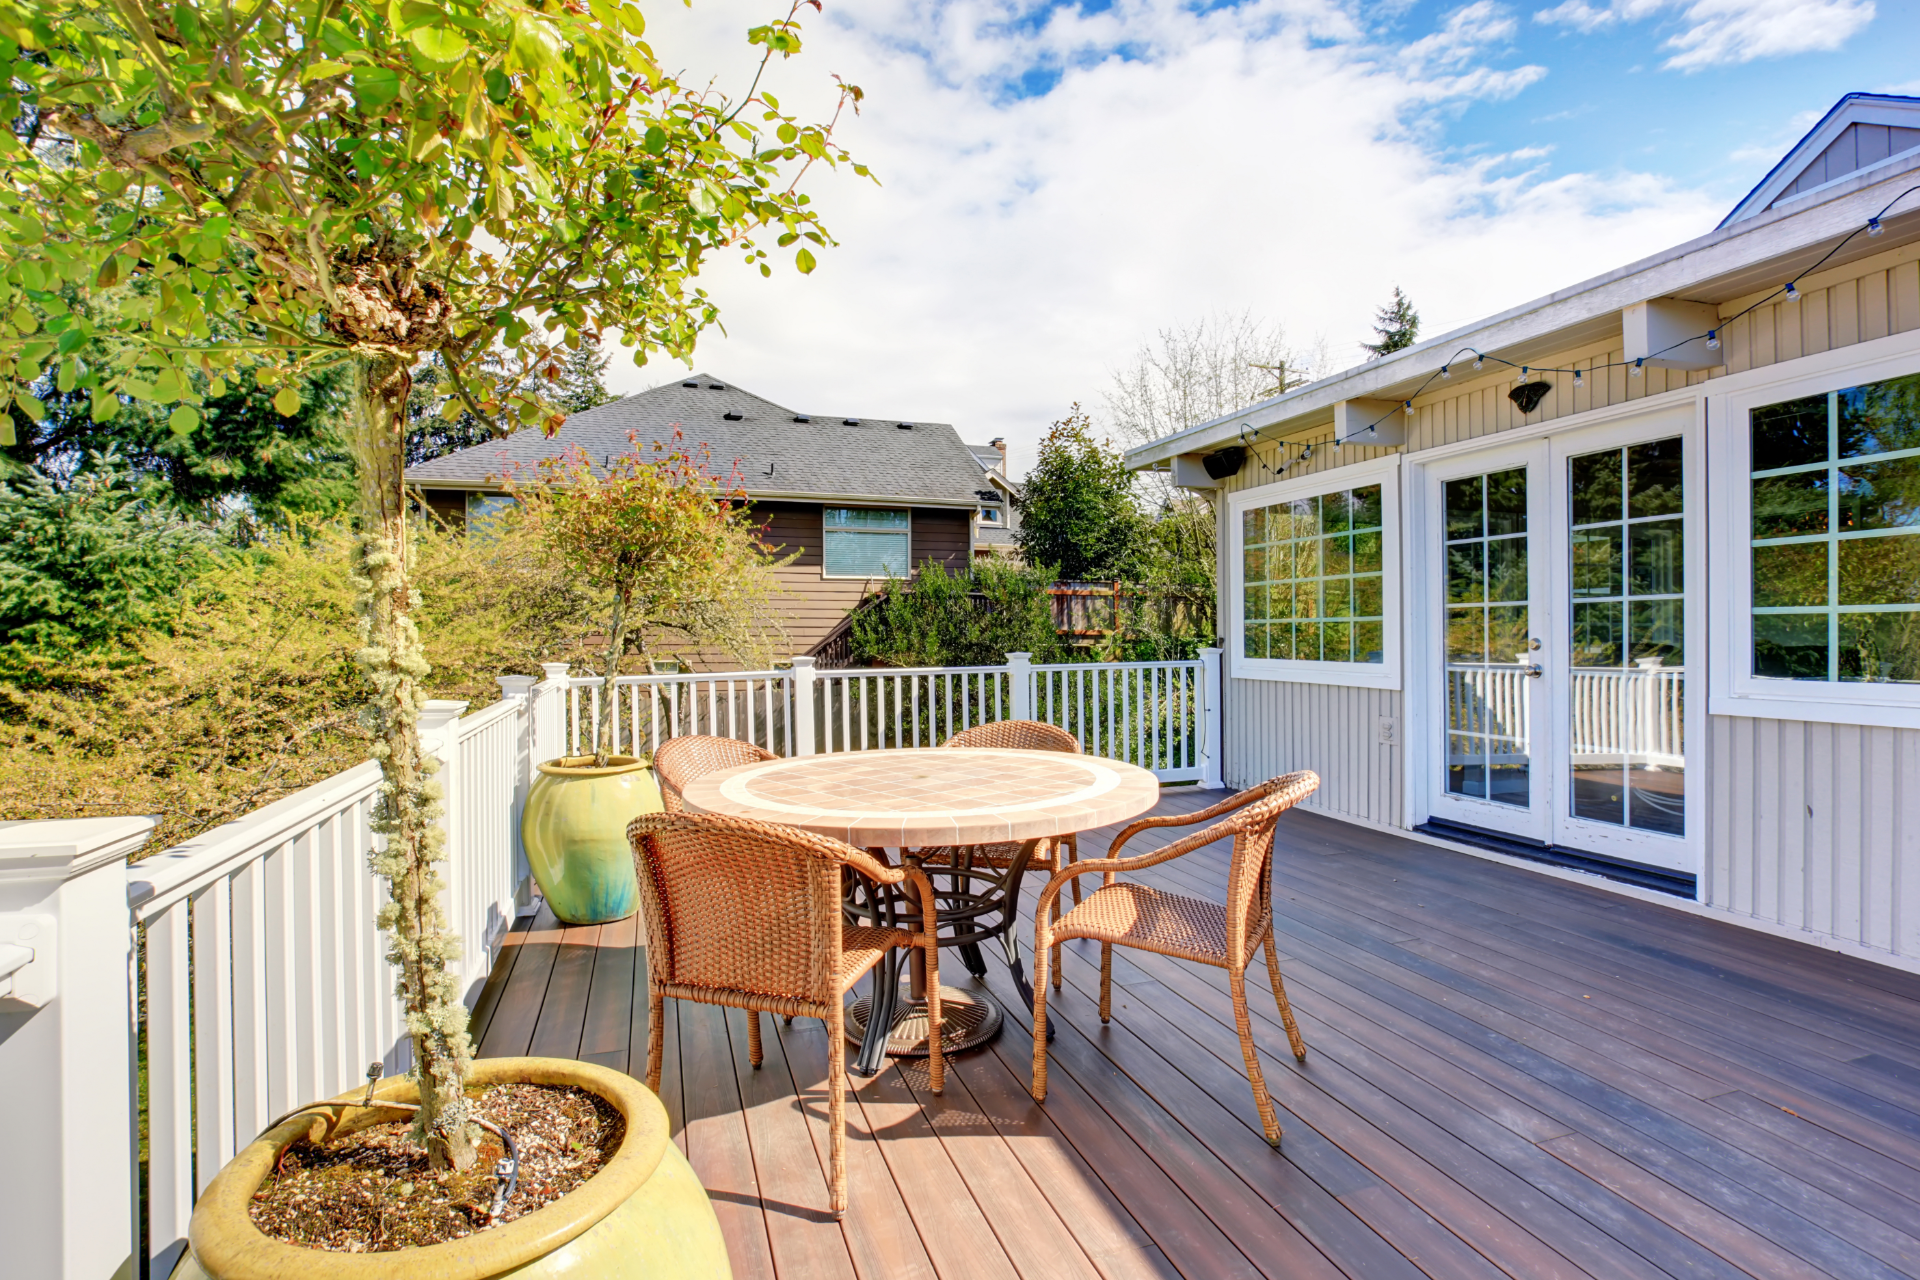 A photo of a house's backyard in Saint Paul, Minnesota. Most of the backyard space is taken up by their deck. There are two large pots with trees on the deck and a table with four chairs. It is a beautiful day in the photo with the sun shining and only a few clouds in the sky